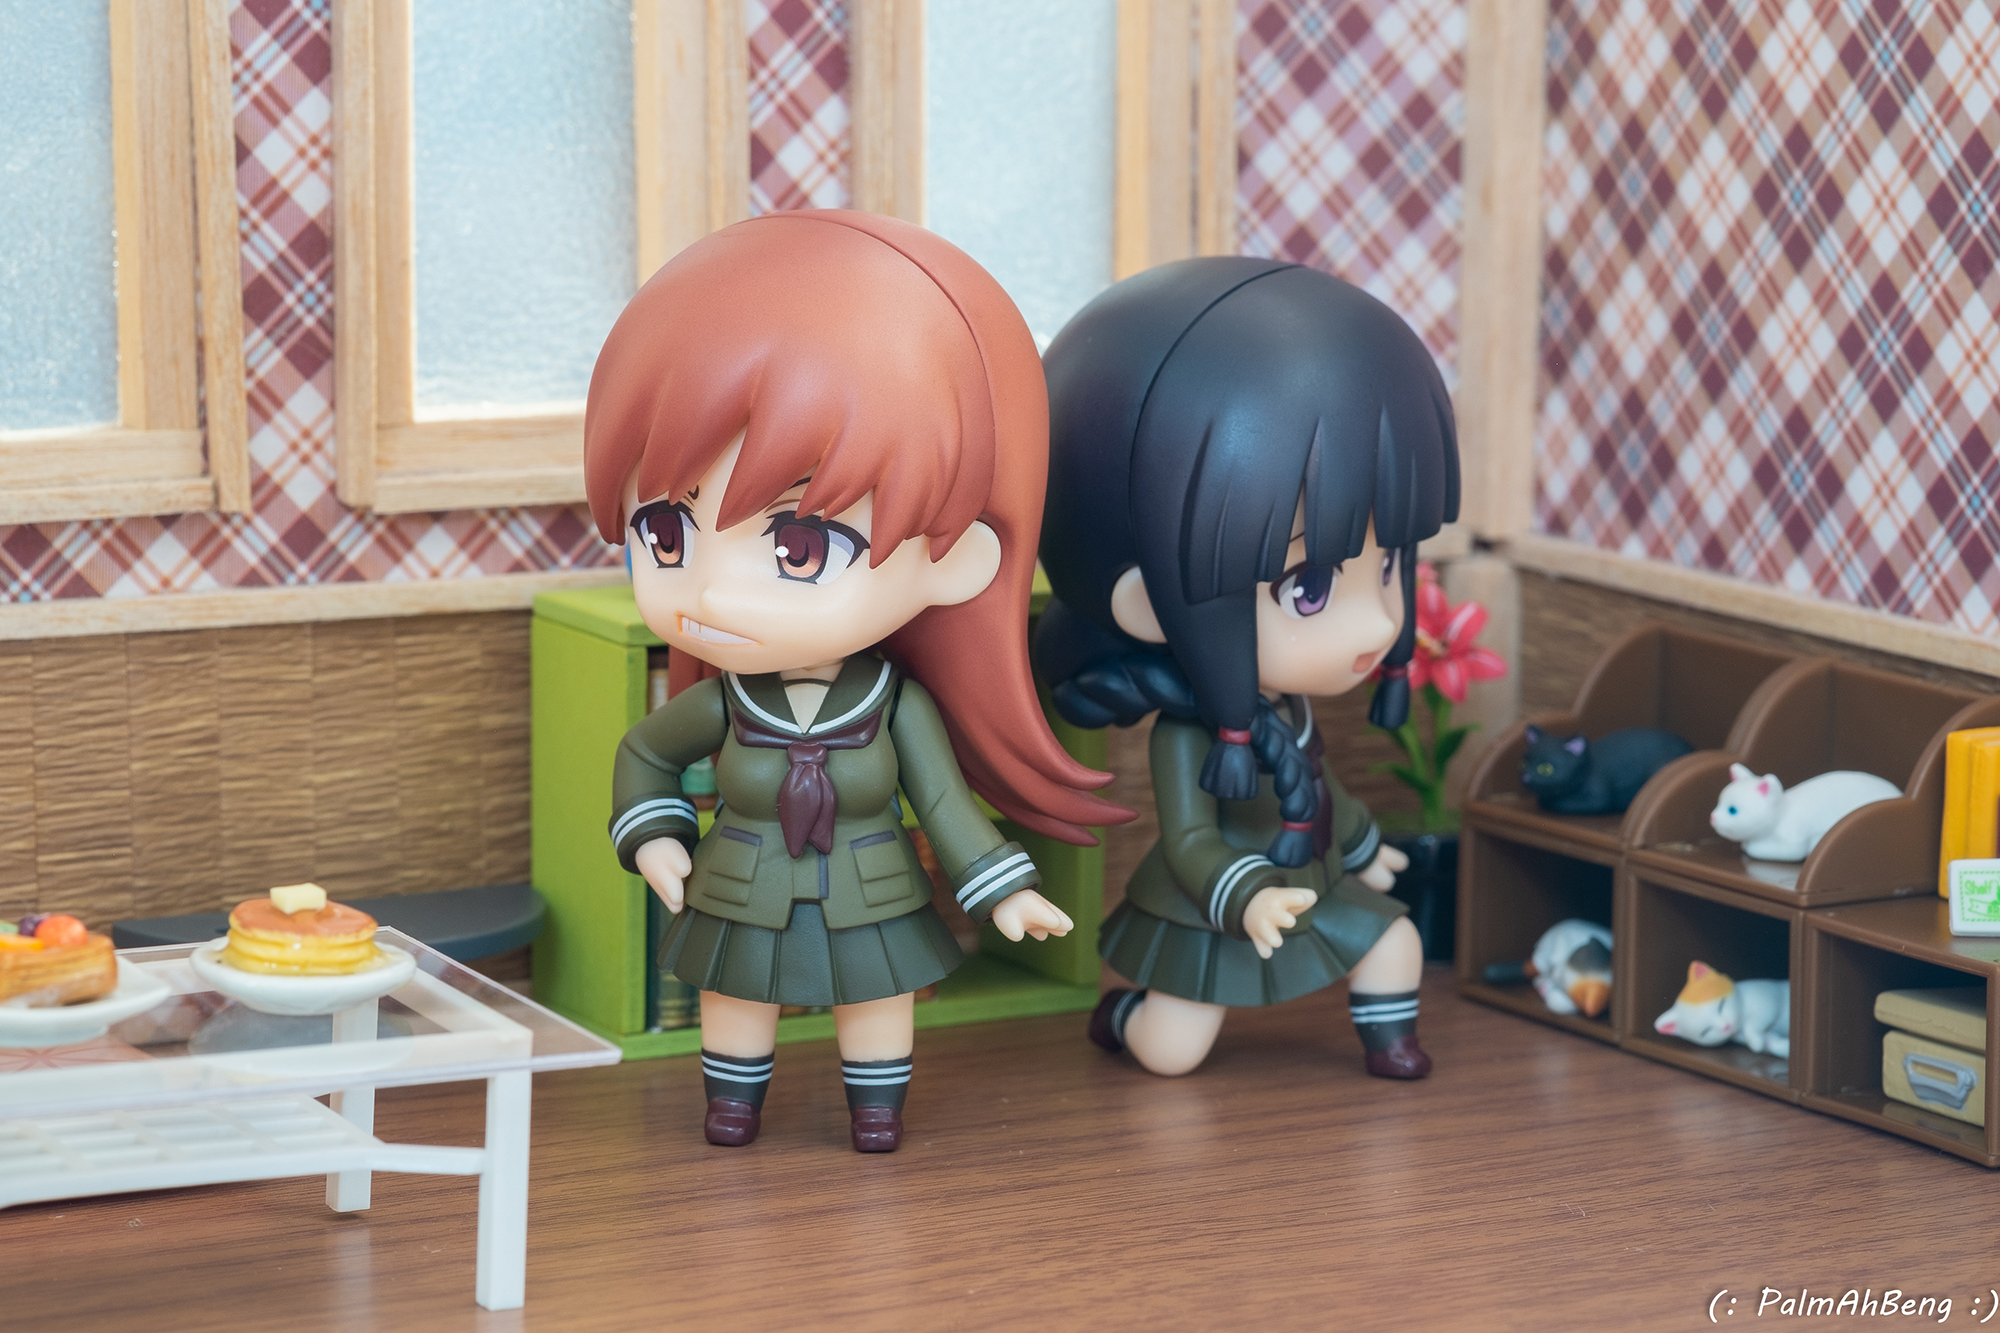 Palmahbeng Toygraphy Jezz How Can Kitakami San Interest In Cat More Than Me Mfc T Co F8o5xz6cdw Kitakami Ooi Kantaicollection Kancolle Nendoroid Nendography Goodsmilecompany Anime ねんどろいど グッドスマイル